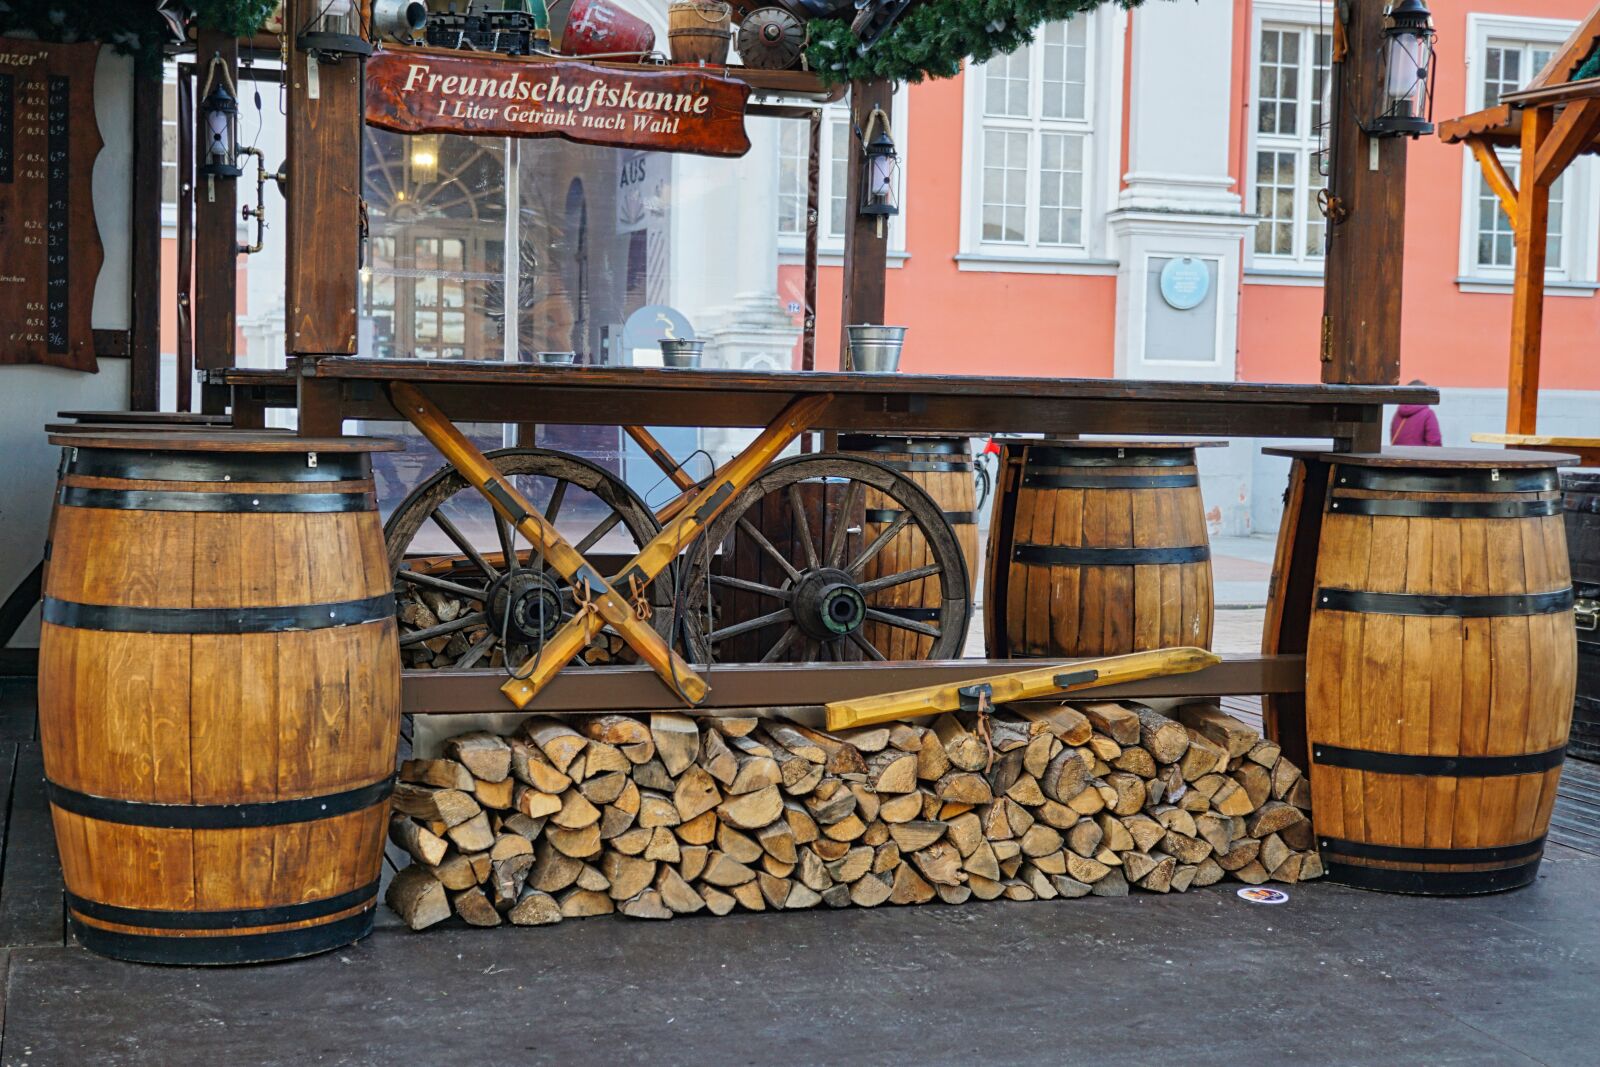 Sony a5100 sample photo. Christmas market, barrels, stand photography